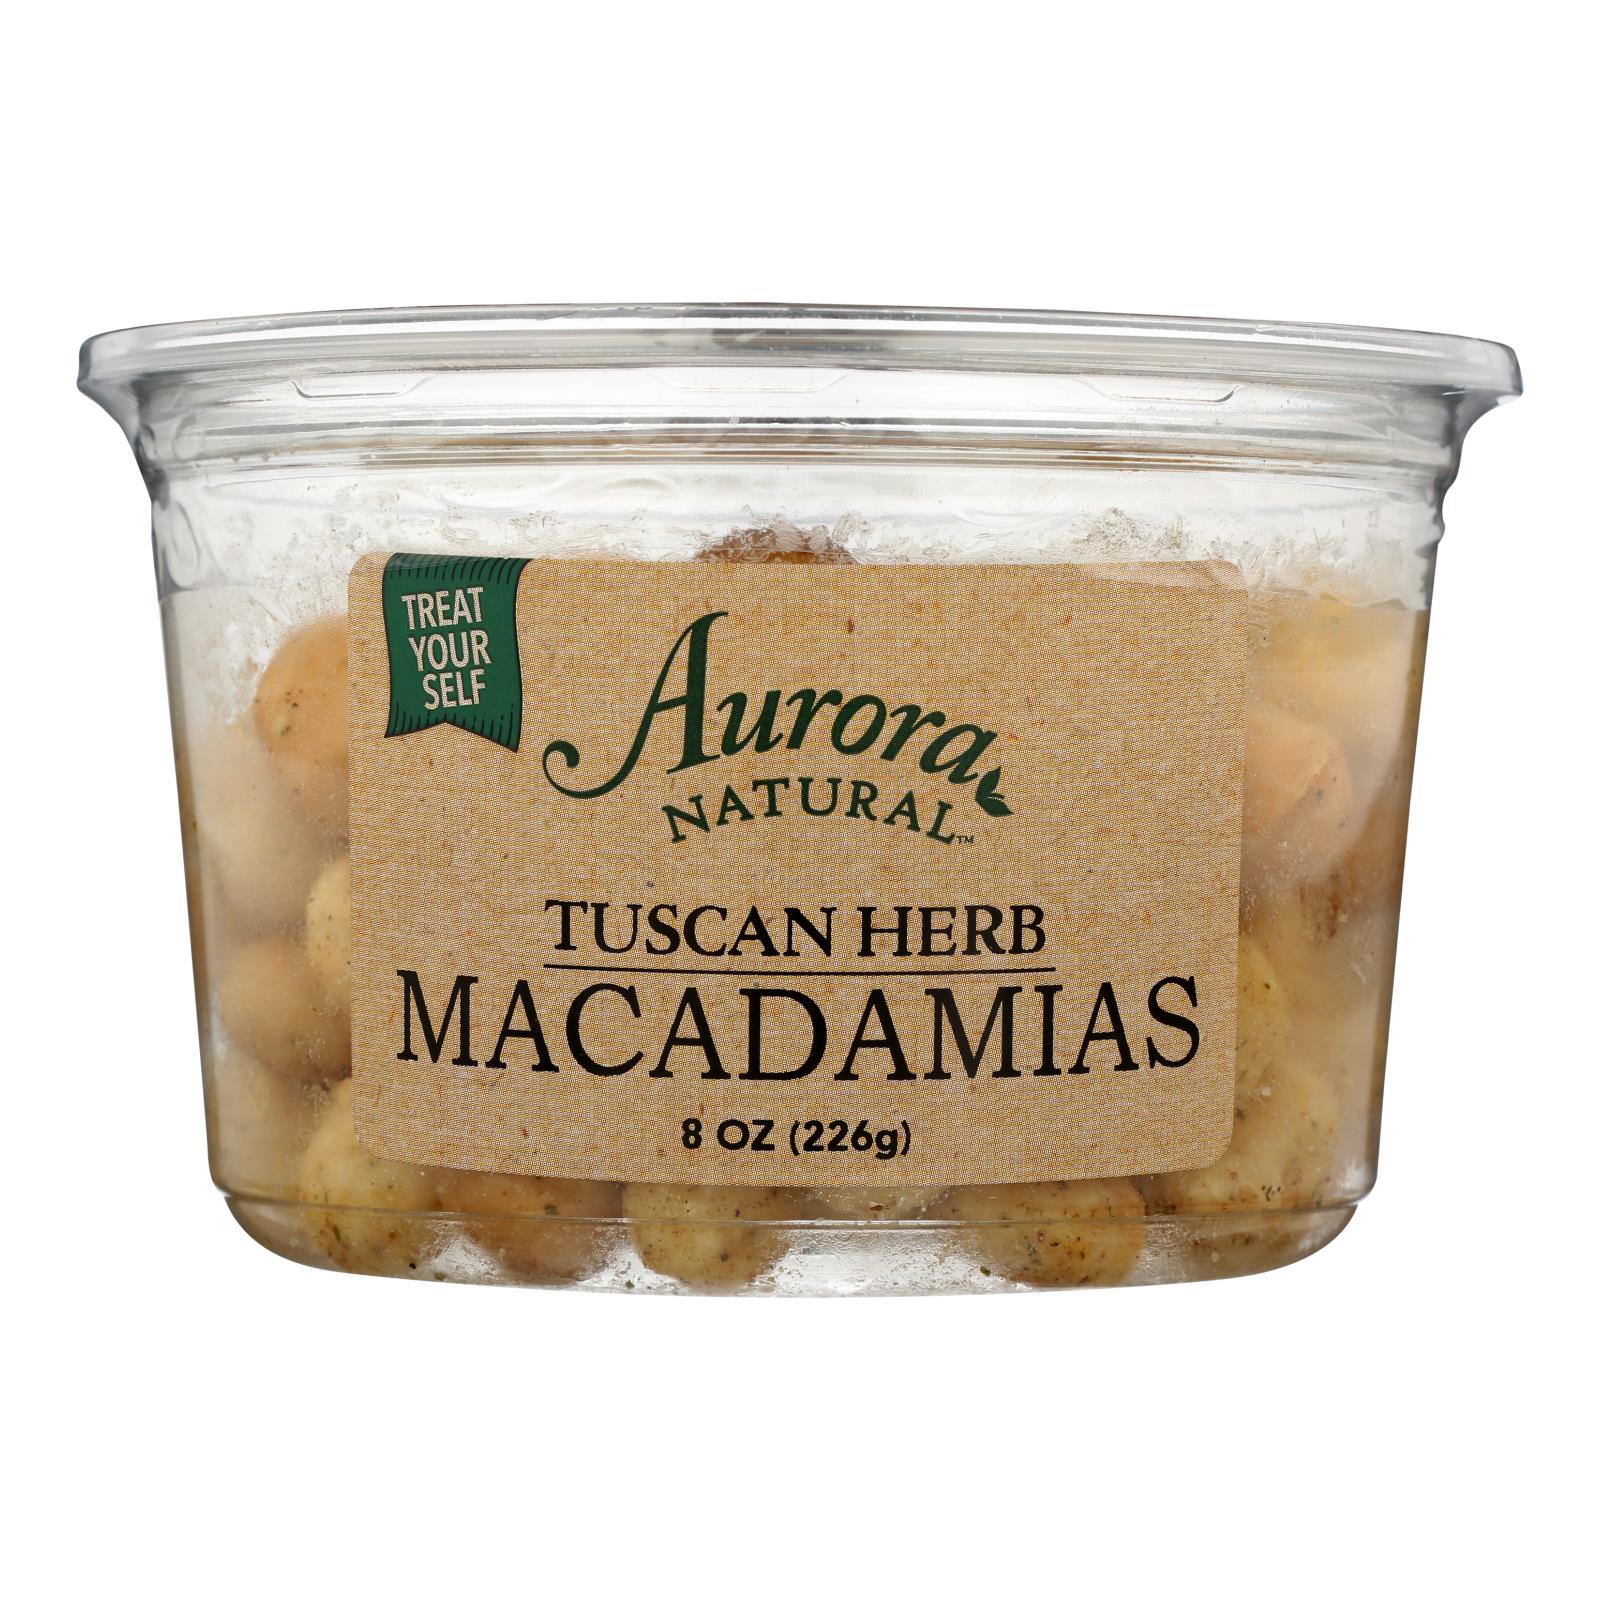 Aurora Natural Products - Macadamia Nuts Tuscan Herbal - Case Of 12 - 8 Oz - Whole Green Foods